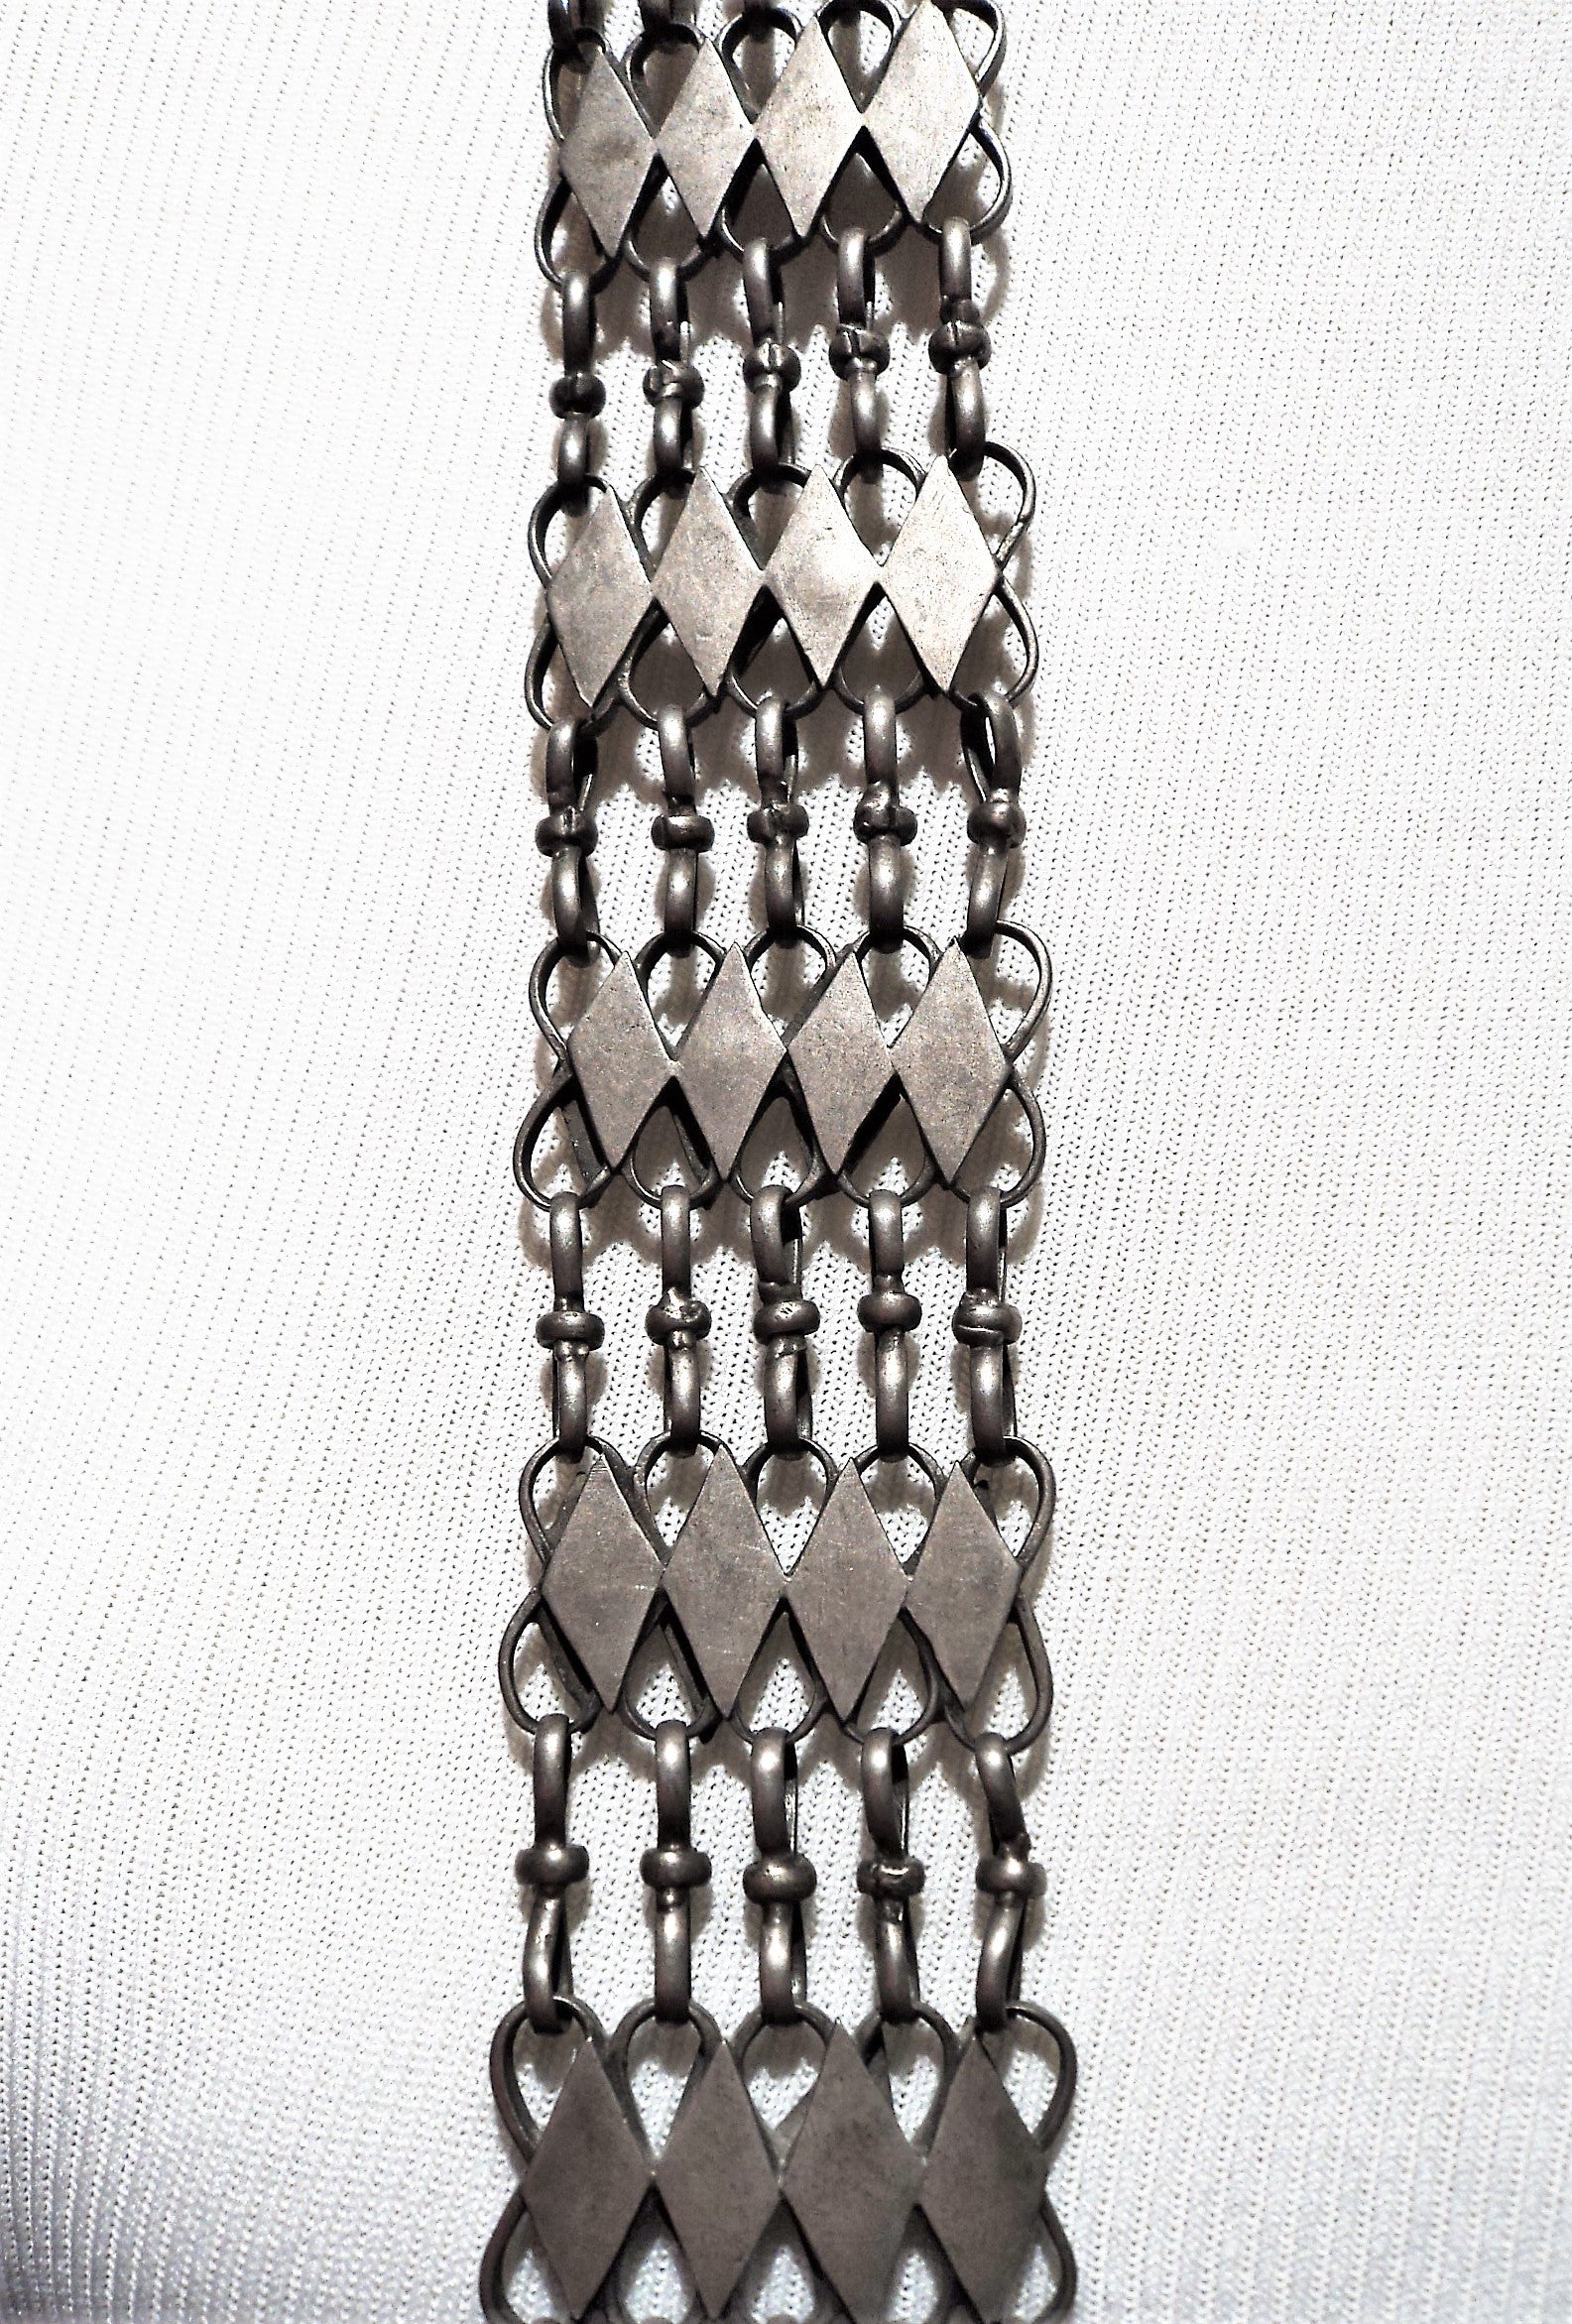 Antique Old Silver Tribal Bedouin Chain Link Belt